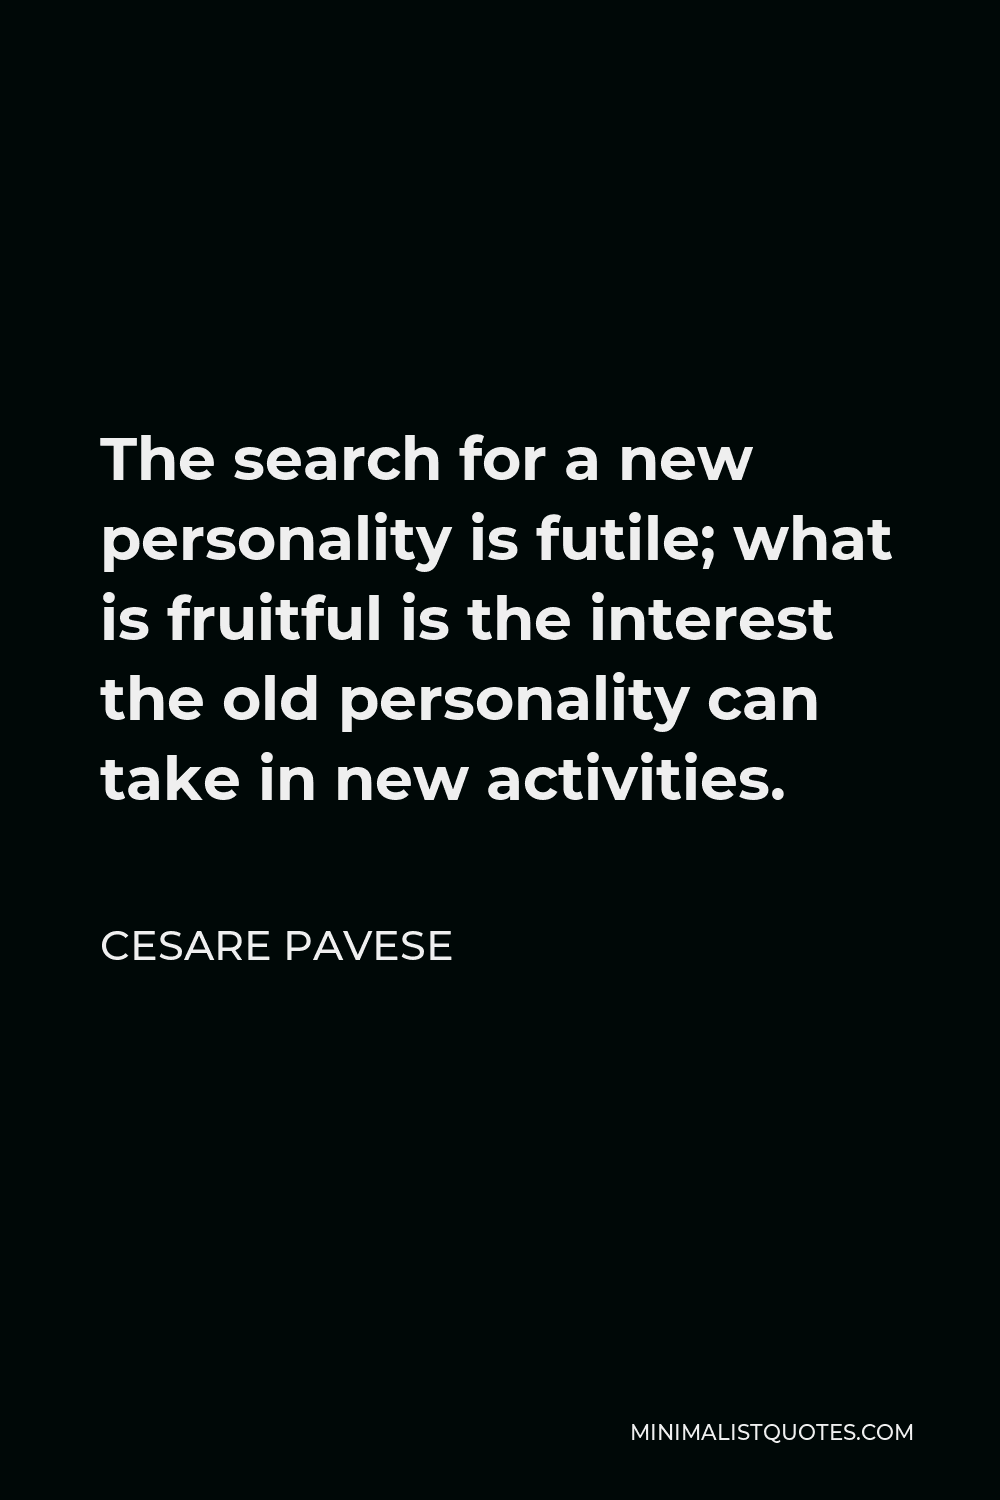 Cesare Pavese Quote - The search for a new personality is futile; what is fruitful is the interest the old personality can take in new activities.